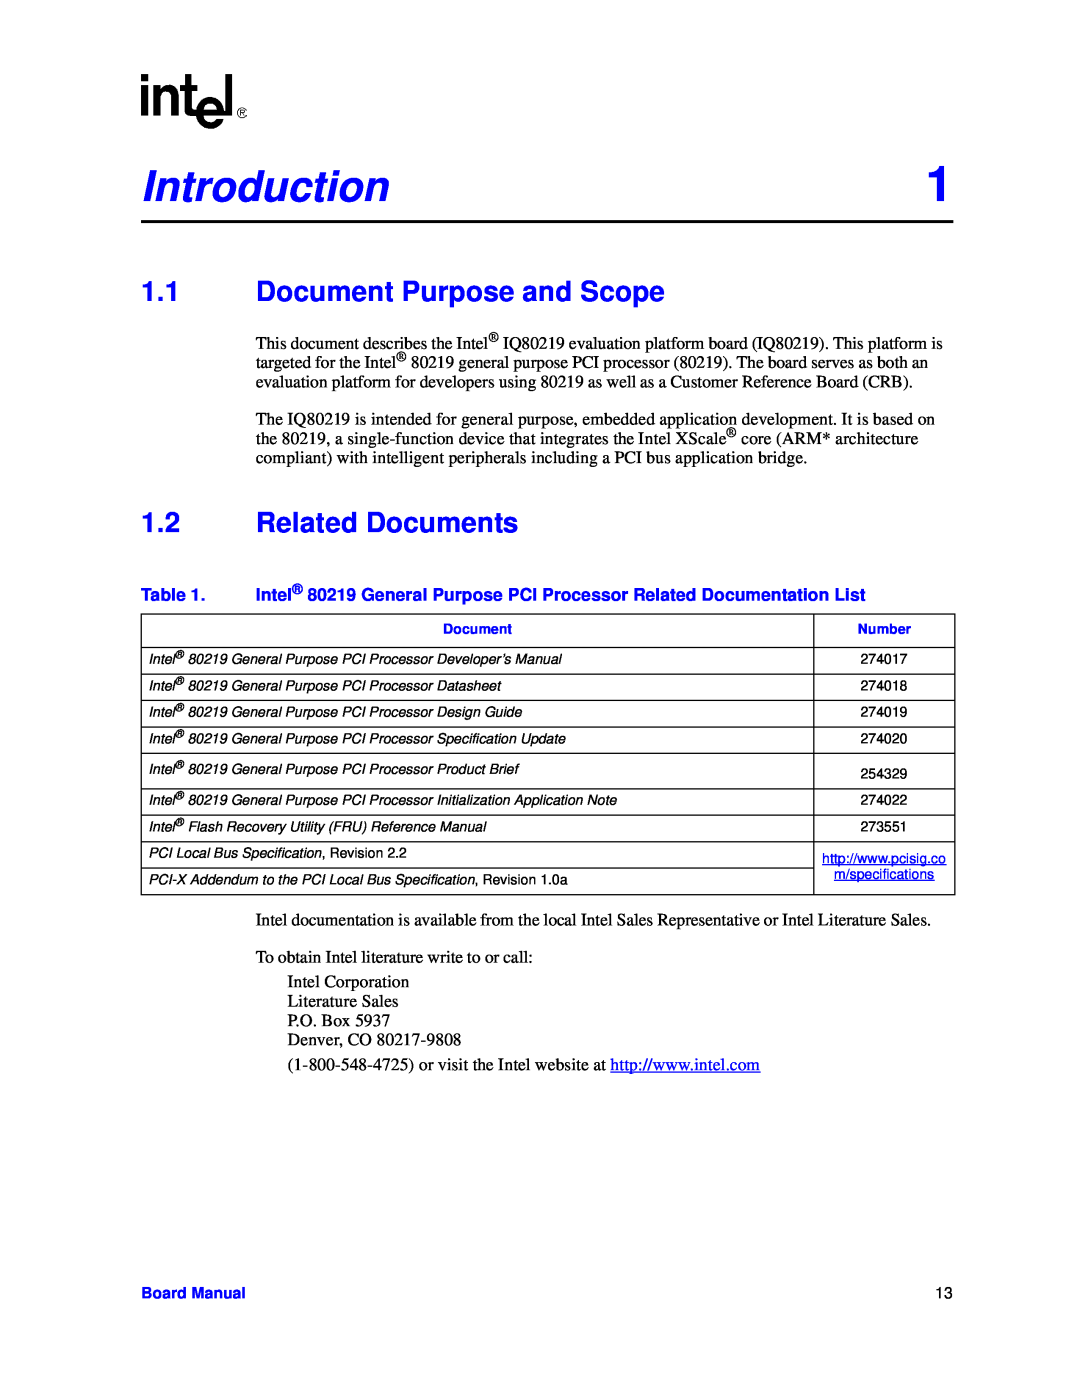 Intel IQ80219 manual Introduction, Document Purpose and Scope, Related Documents 